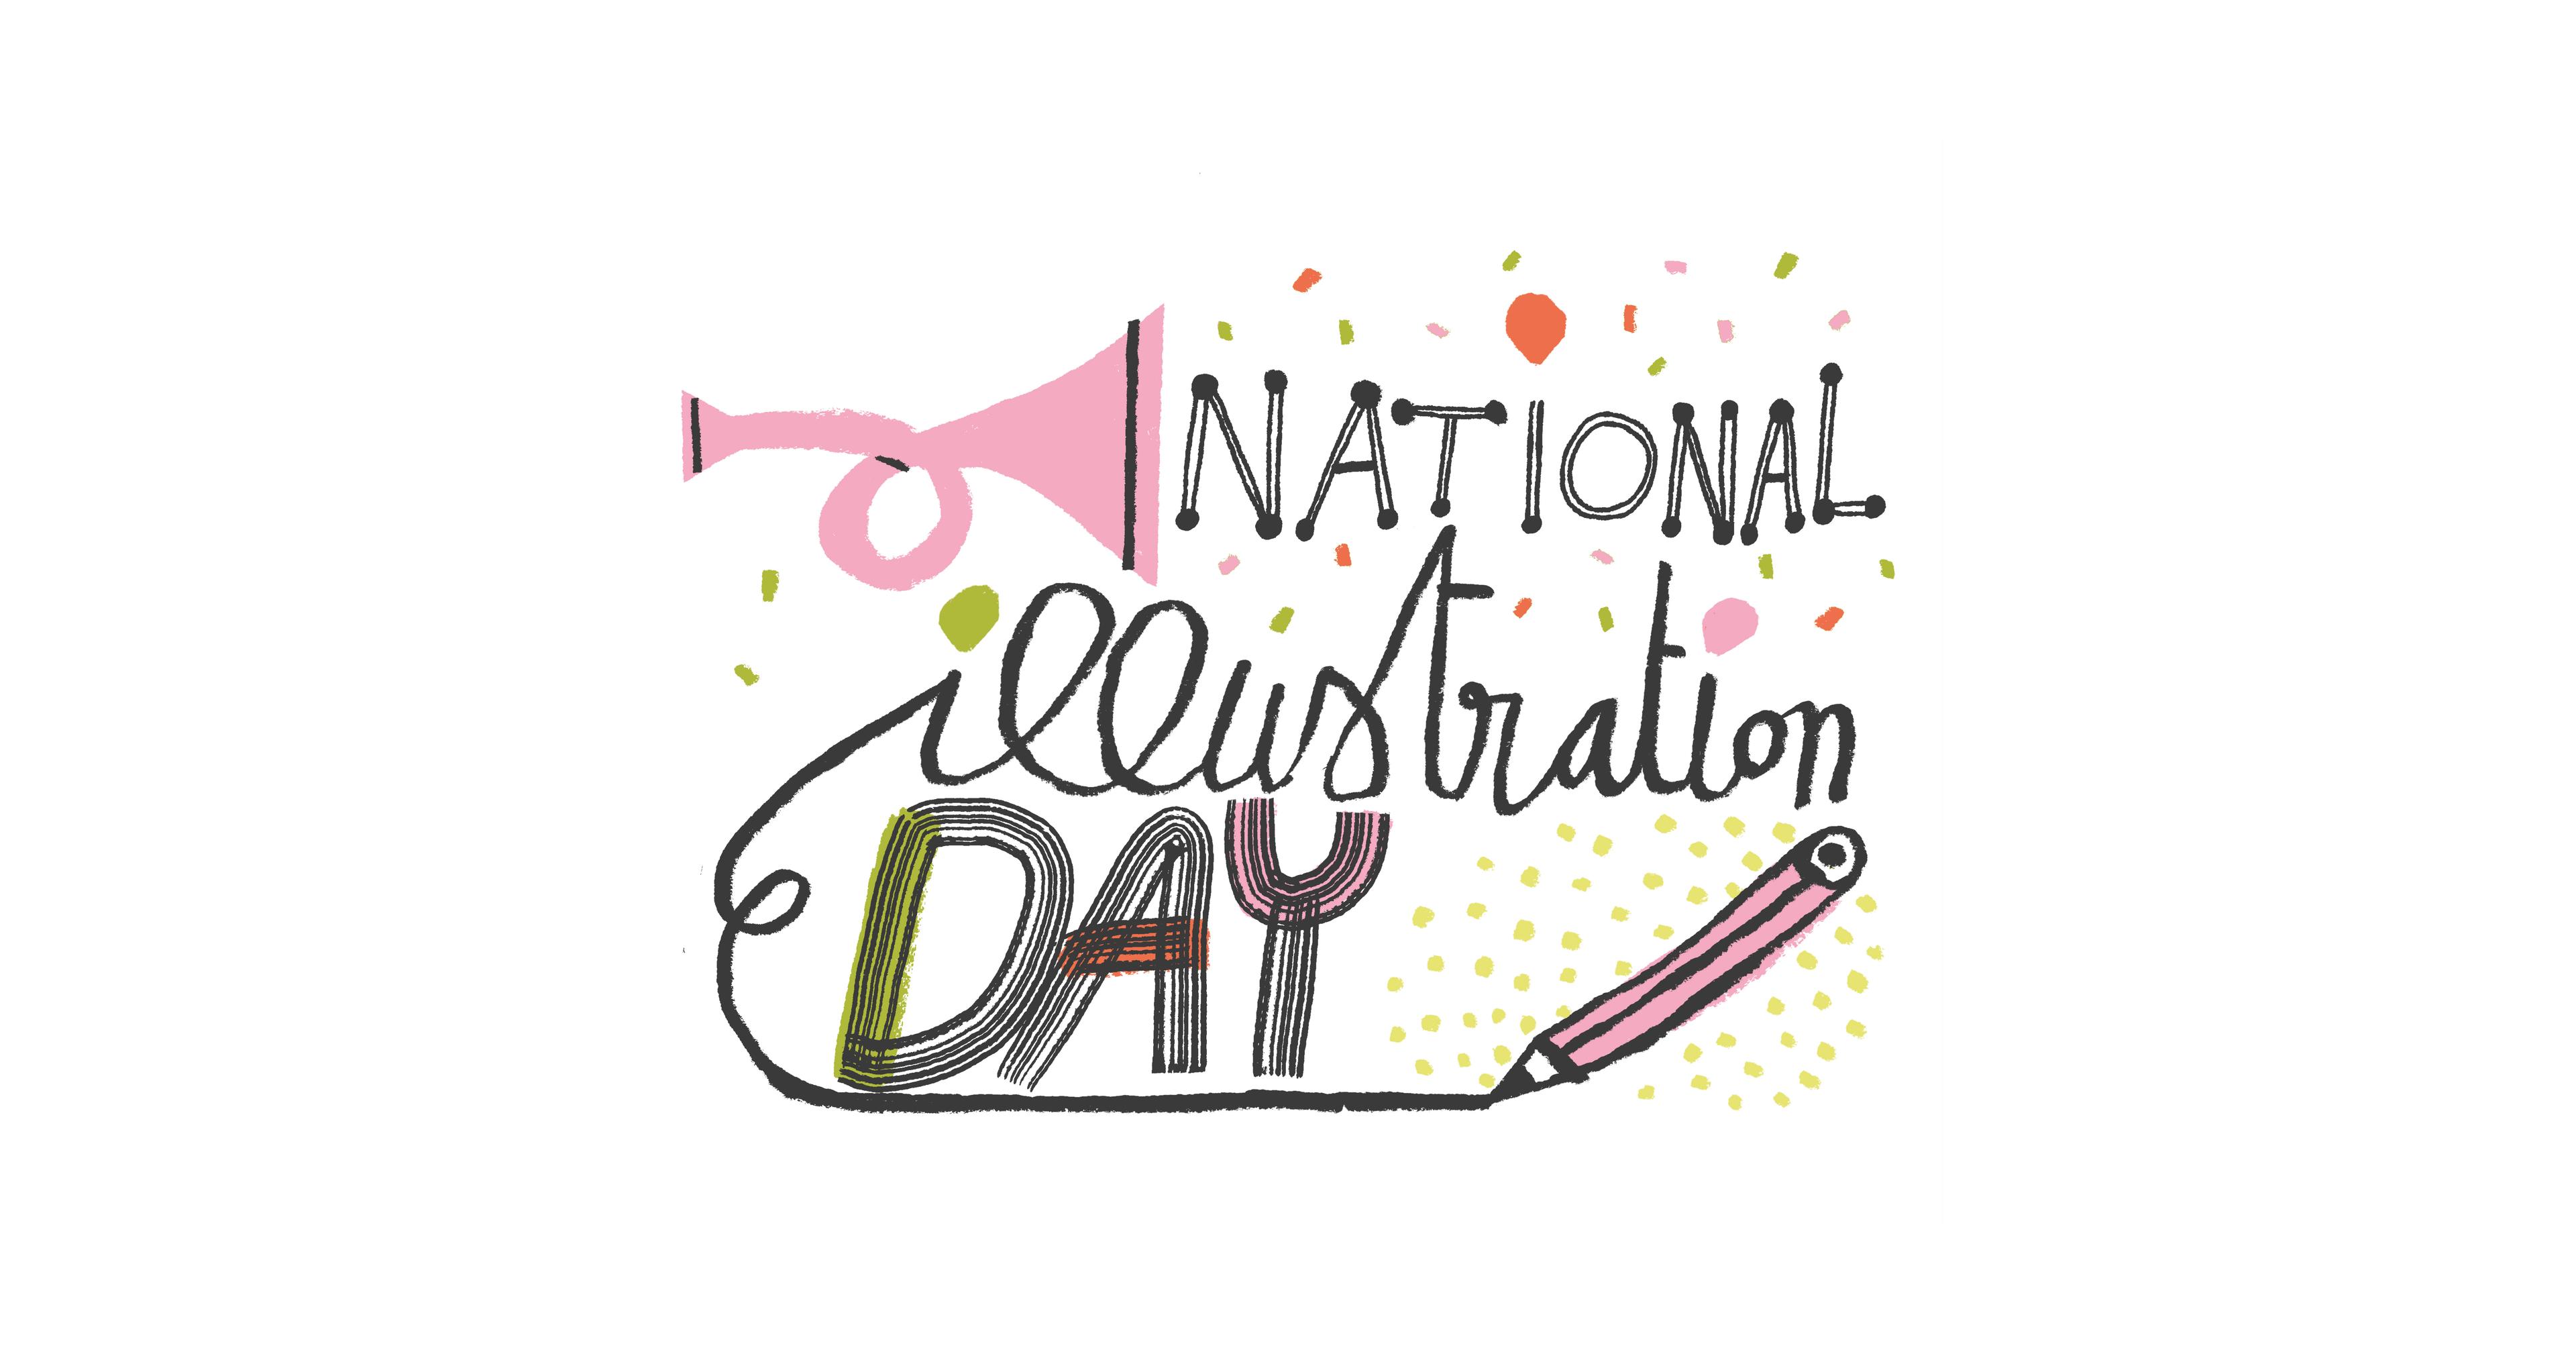 National Illustration Day logo with illustrated pencil, horn and confetti.